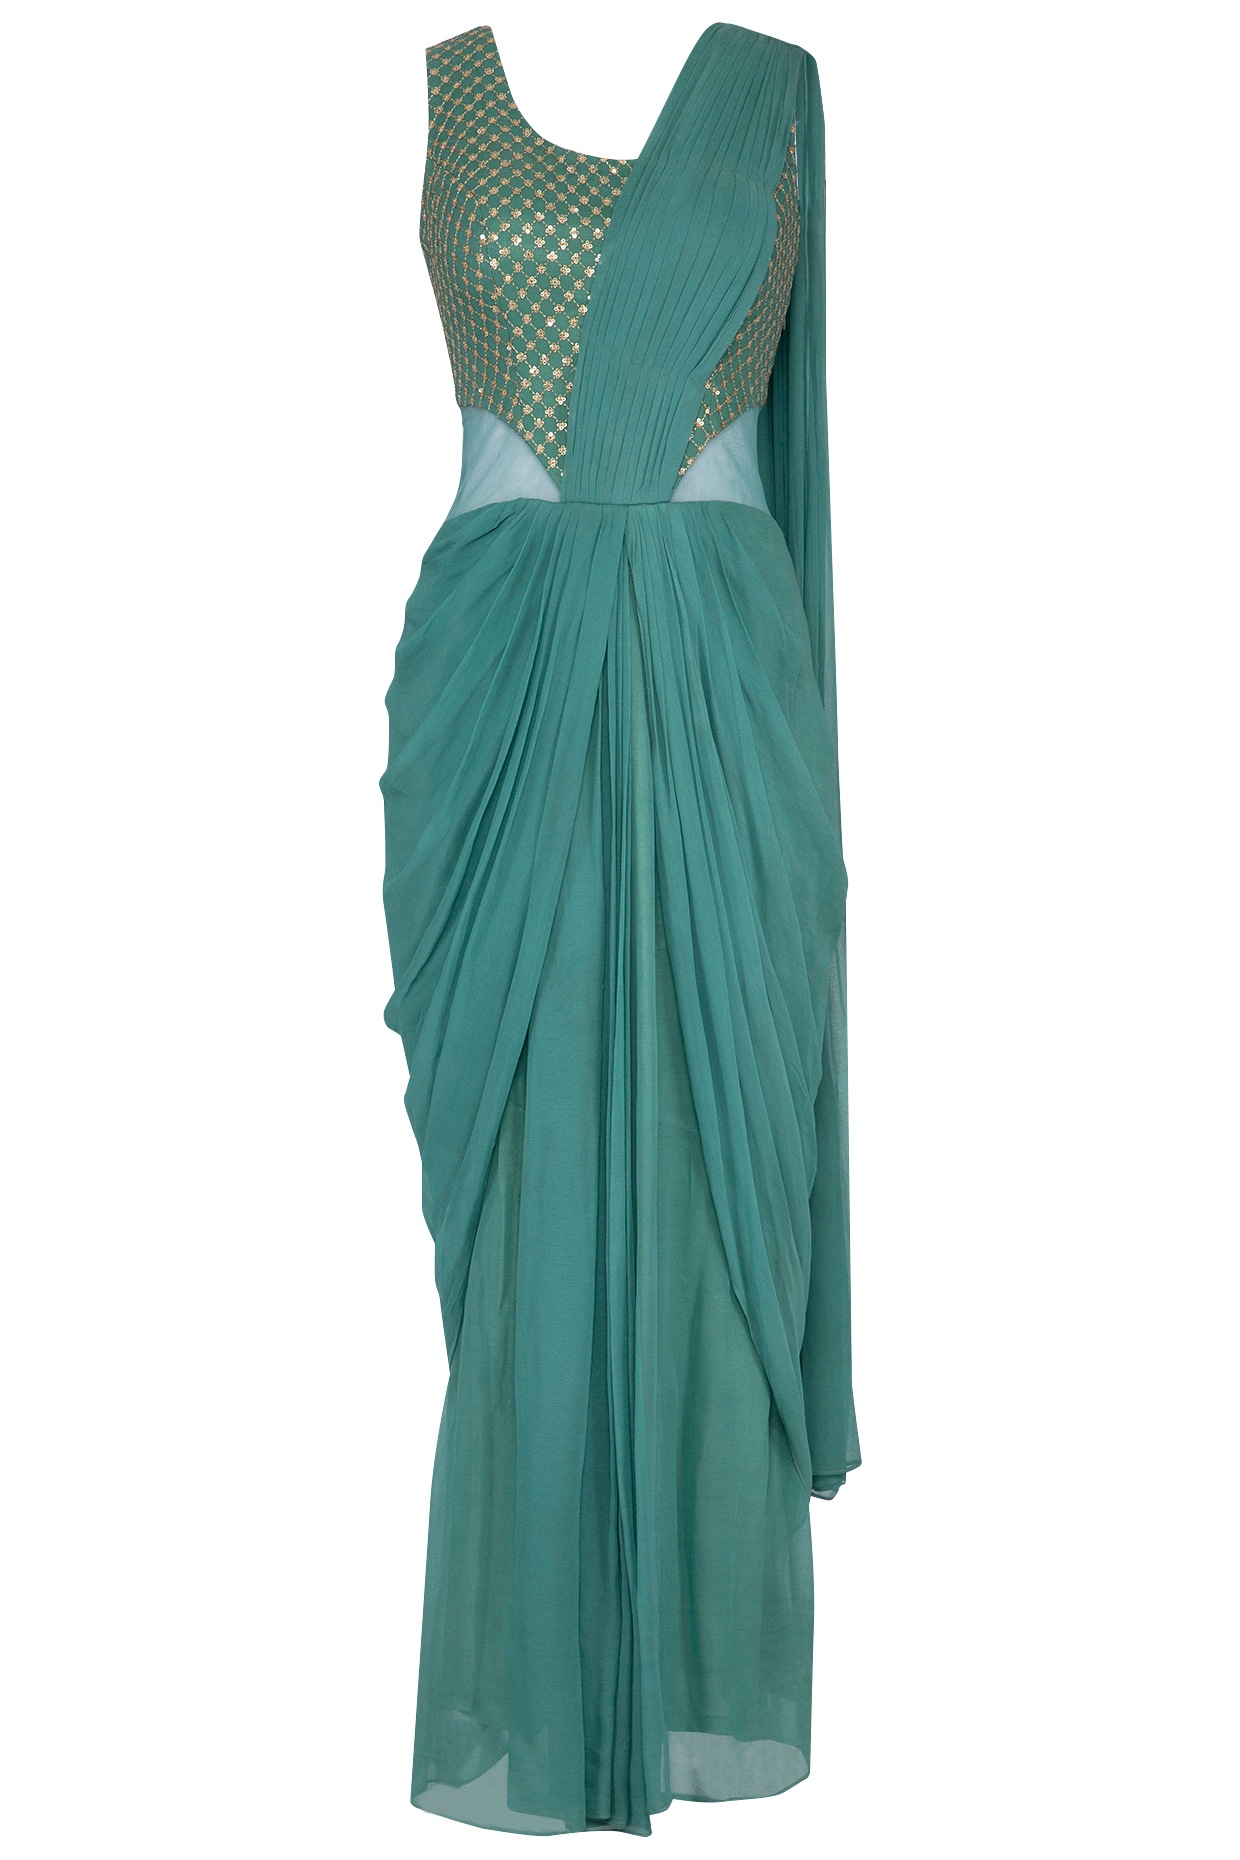 Gold Lace Crystal Fringed Pre-Draped Sari Gown – Preserve